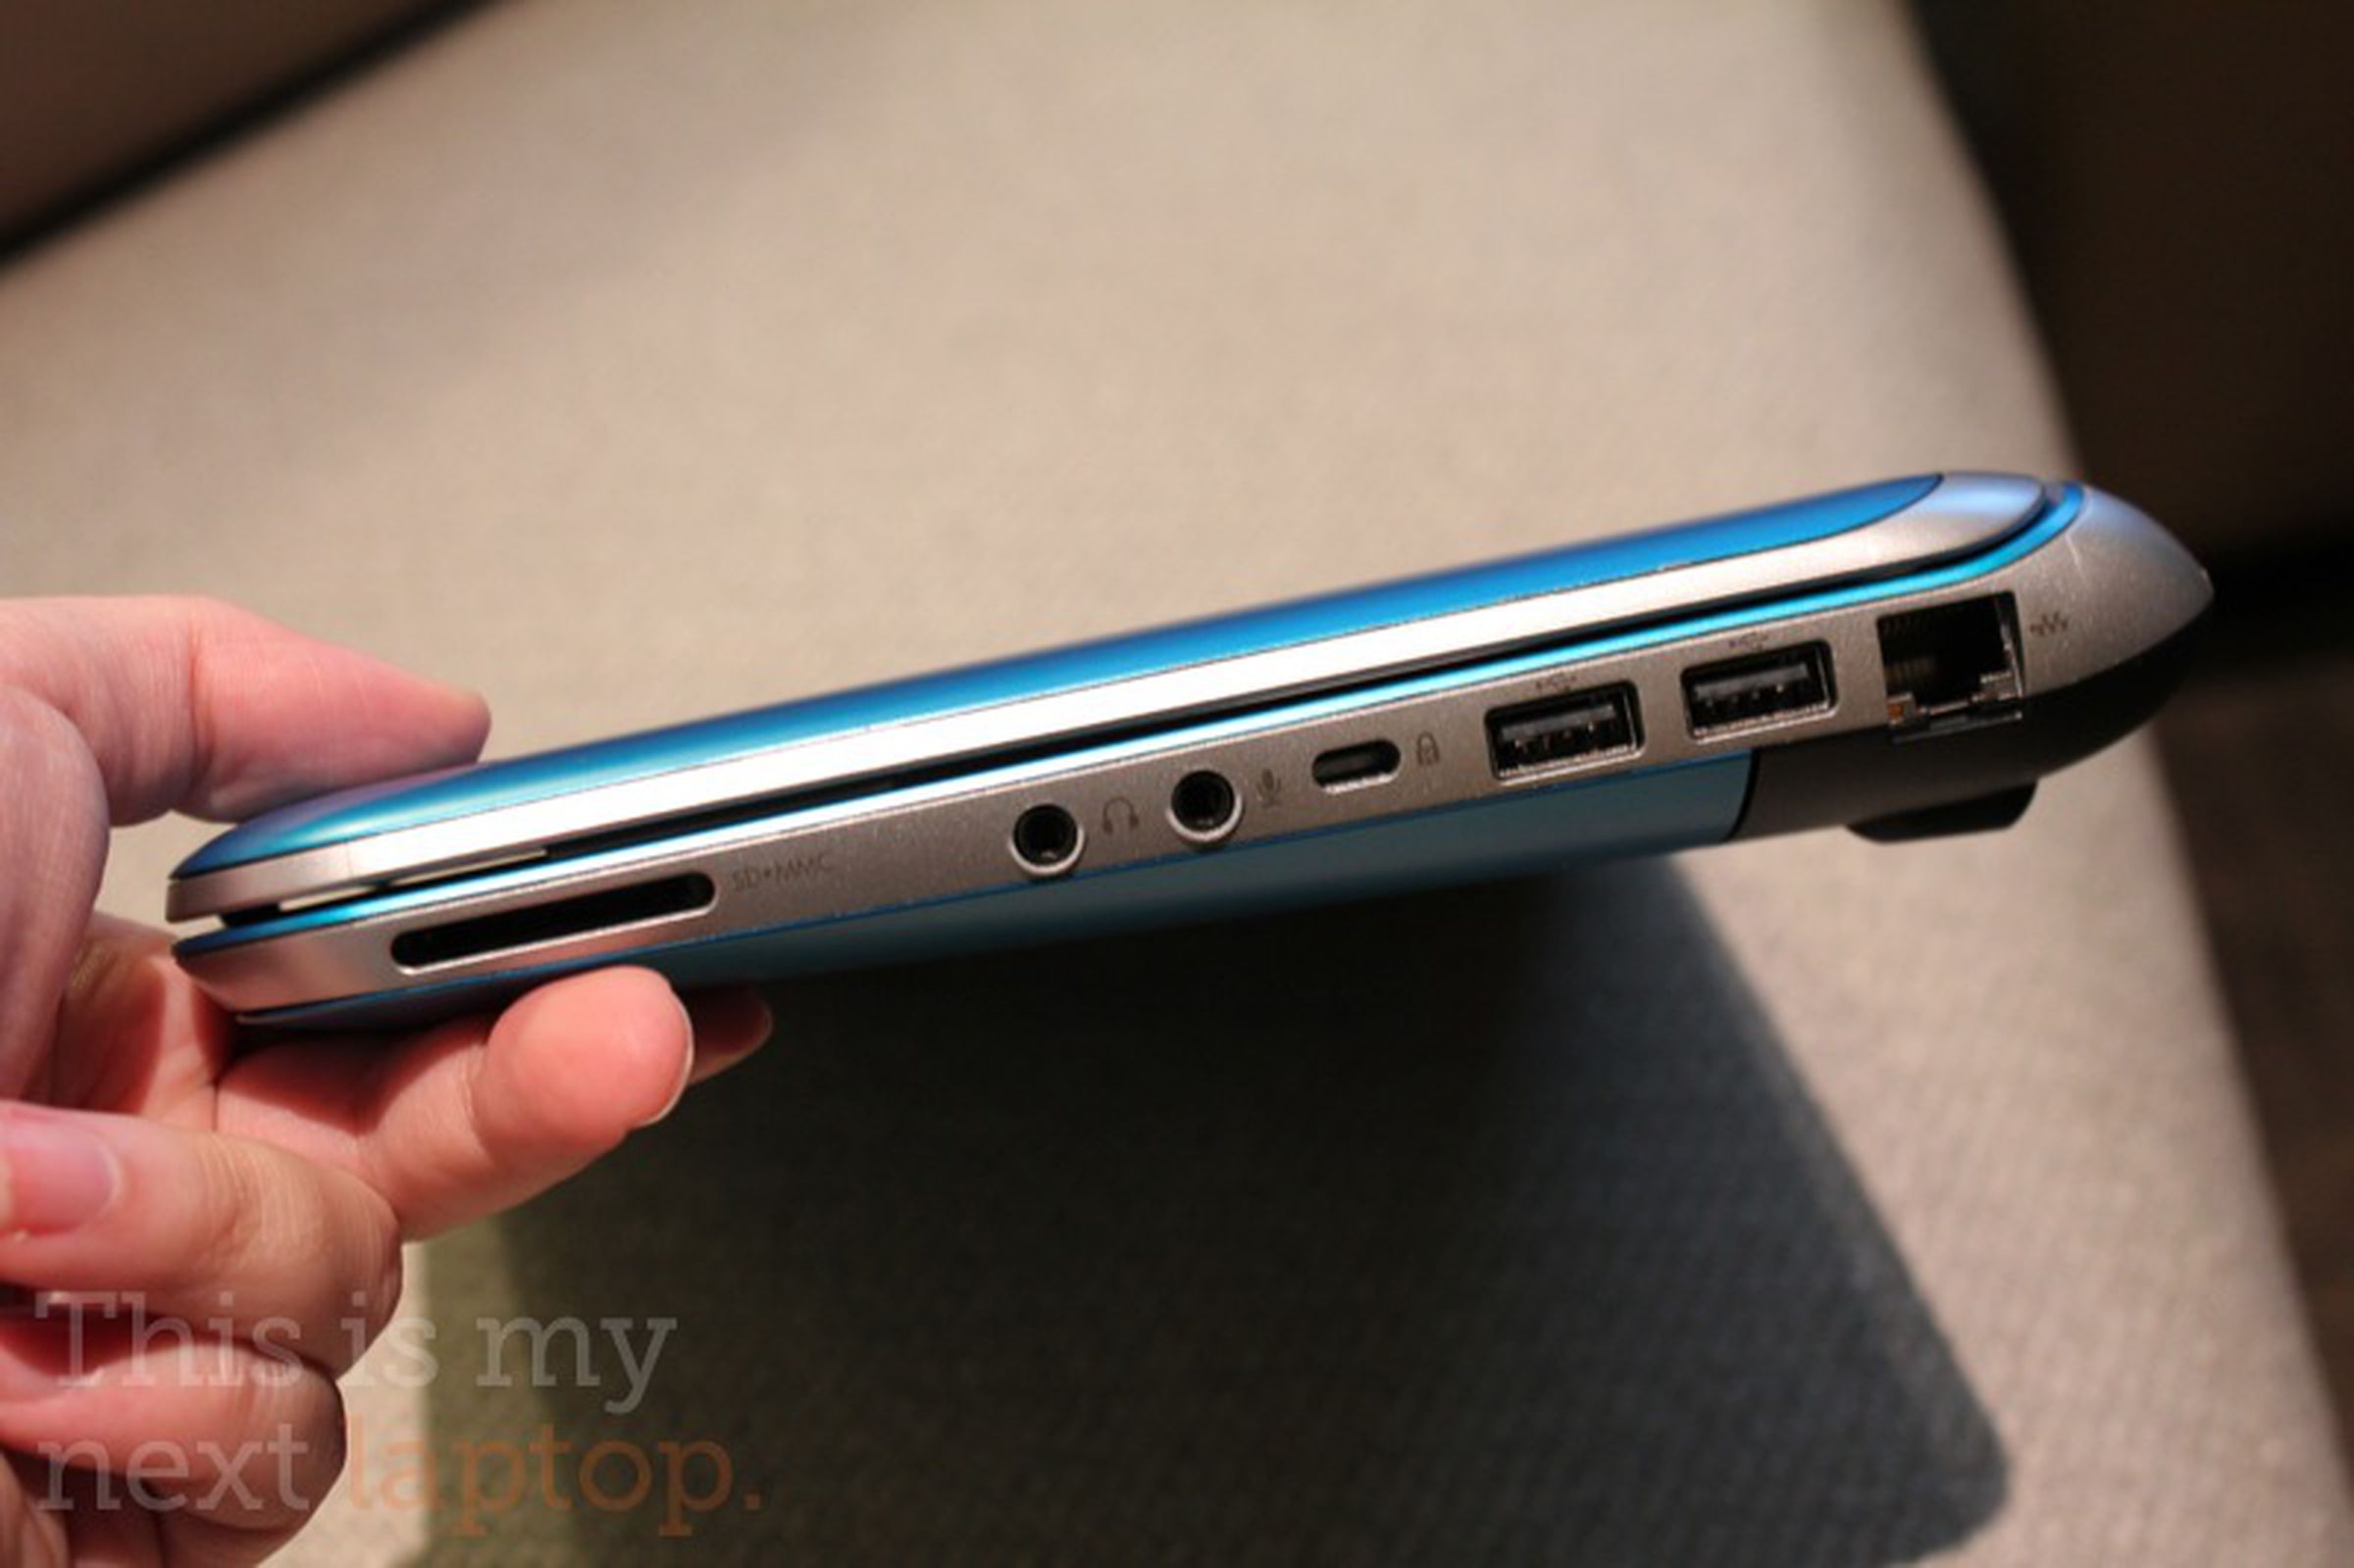 HP Mini 210 hands-on pictures